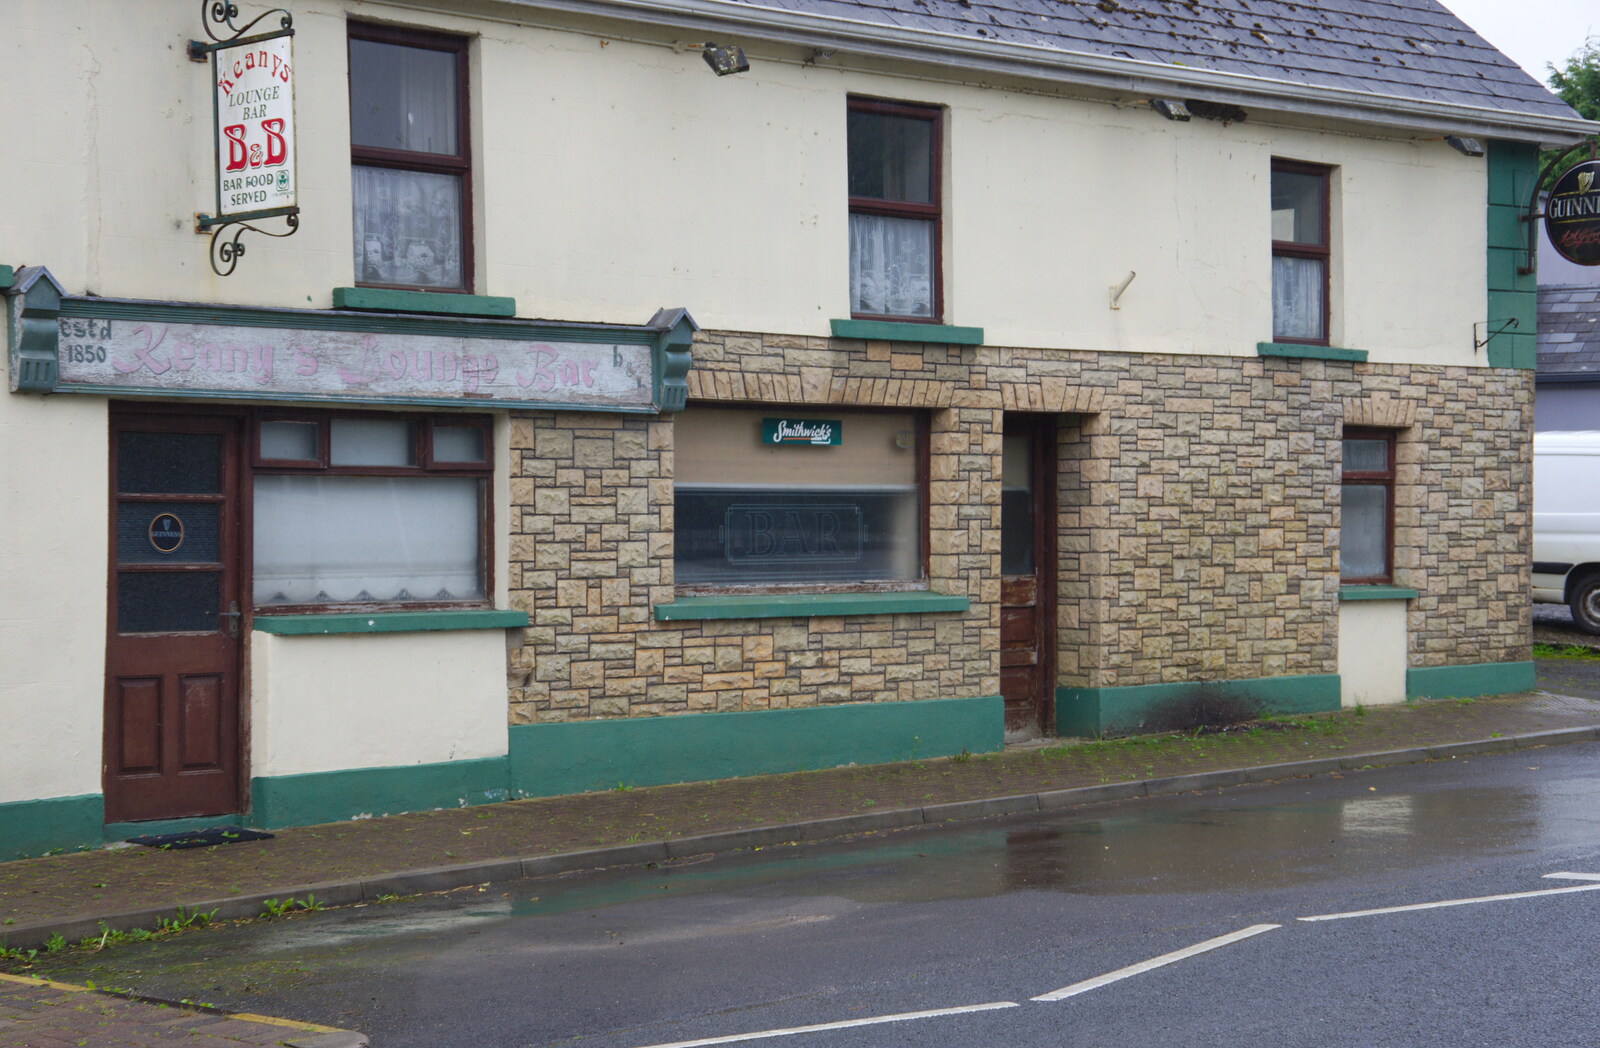 The closed Keany's Lounge and Bar, established 1850  from Travels in the Borderlands: An Blaic/Blacklion to Belcoo and back, Cavan and Fermanagh, Ireland - 22nd August 2019